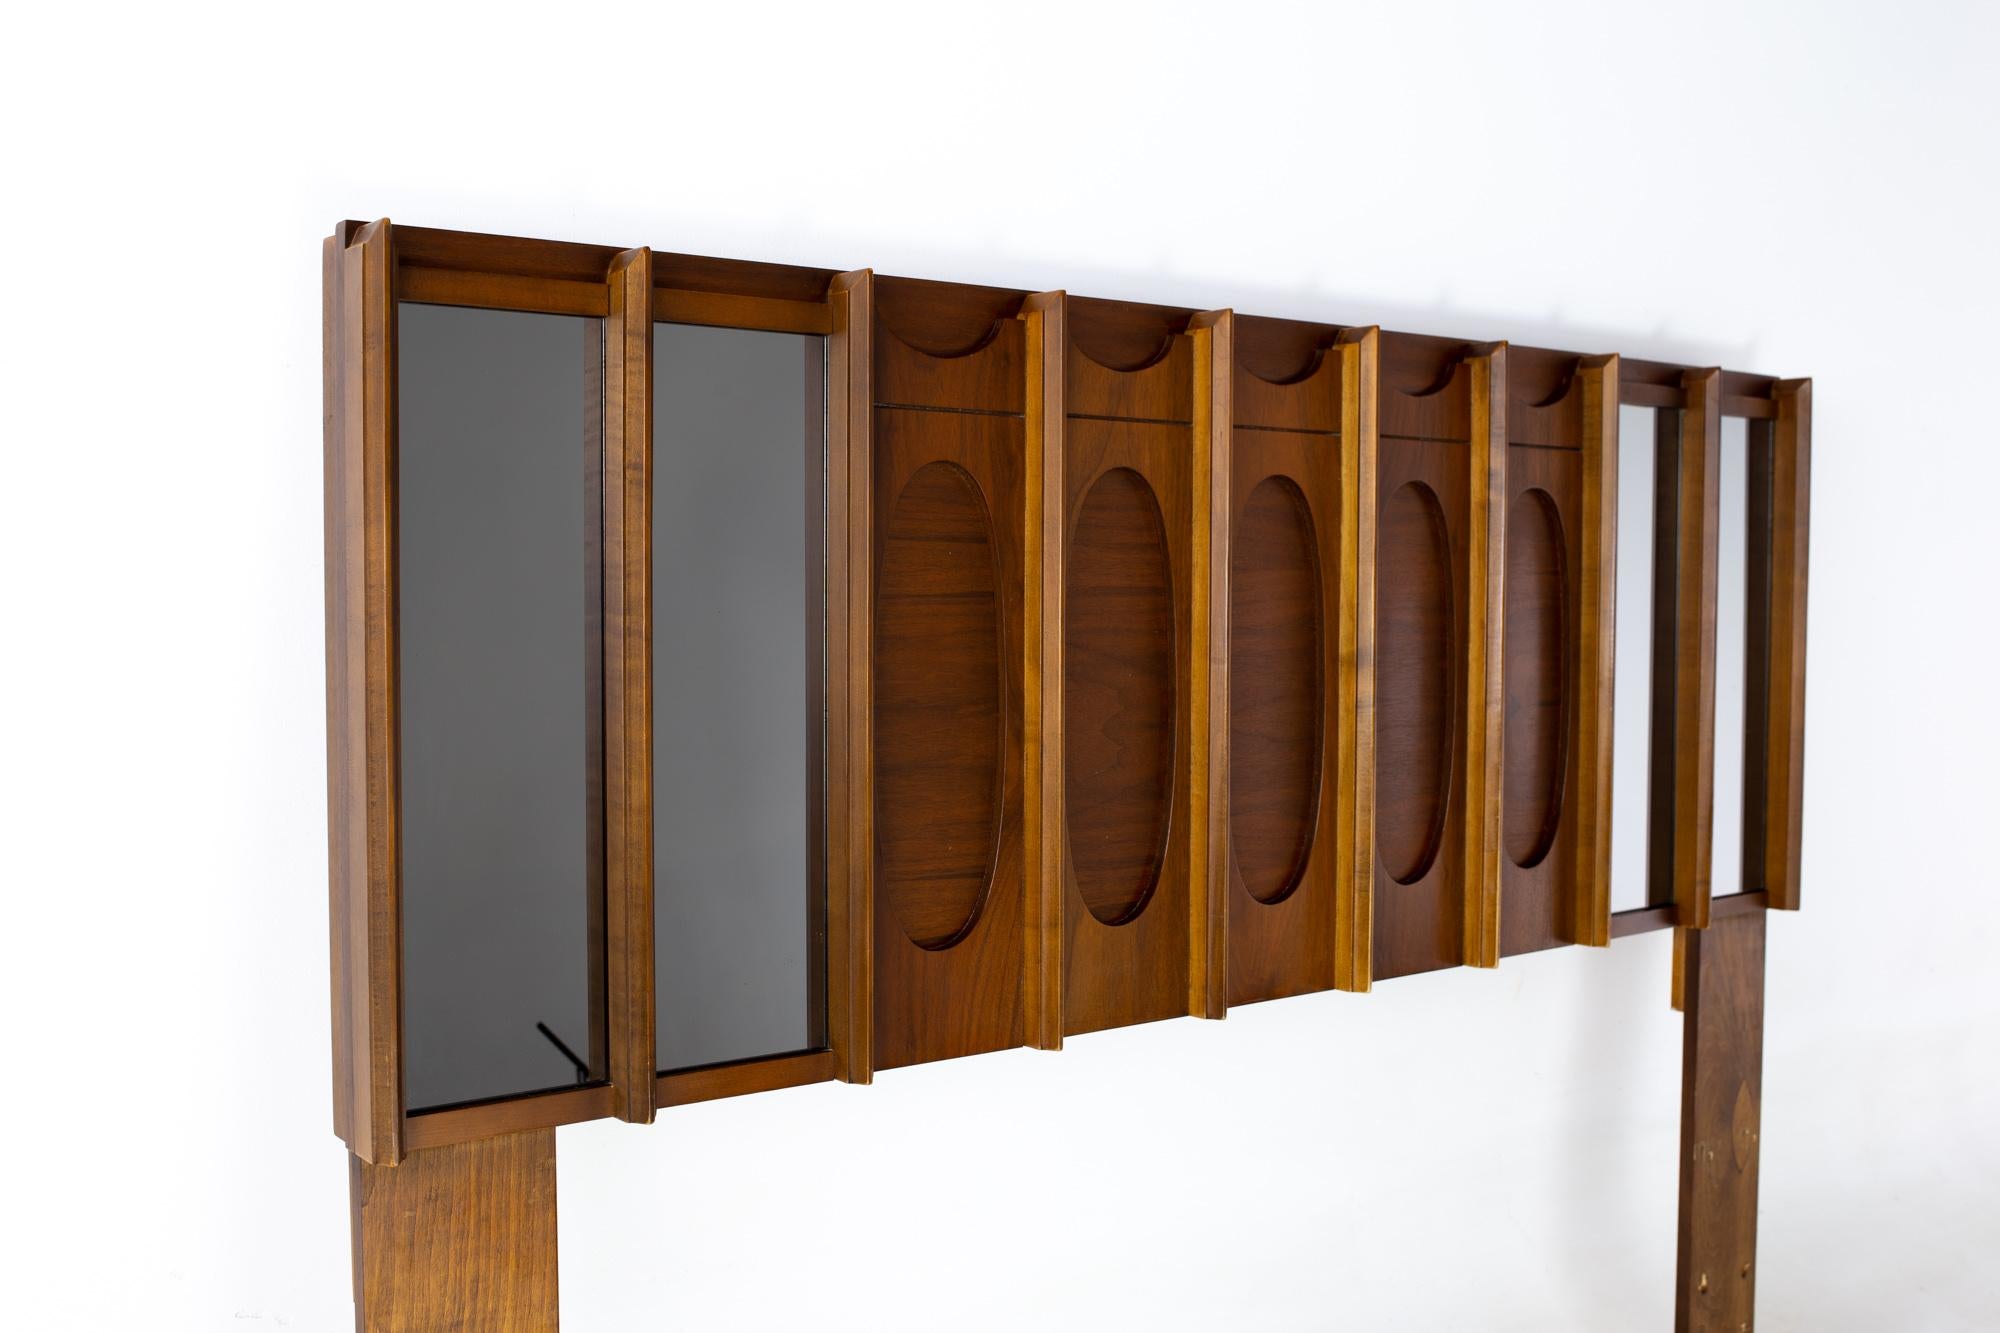 Tobago brutalist mid century walnut and mirror Queen storage headboard
Headboard measures: 60 wide x 4 deep x 44.5 inches high

All pieces of furniture can be had in what we call restored vintage condition. That means the piece is restored upon